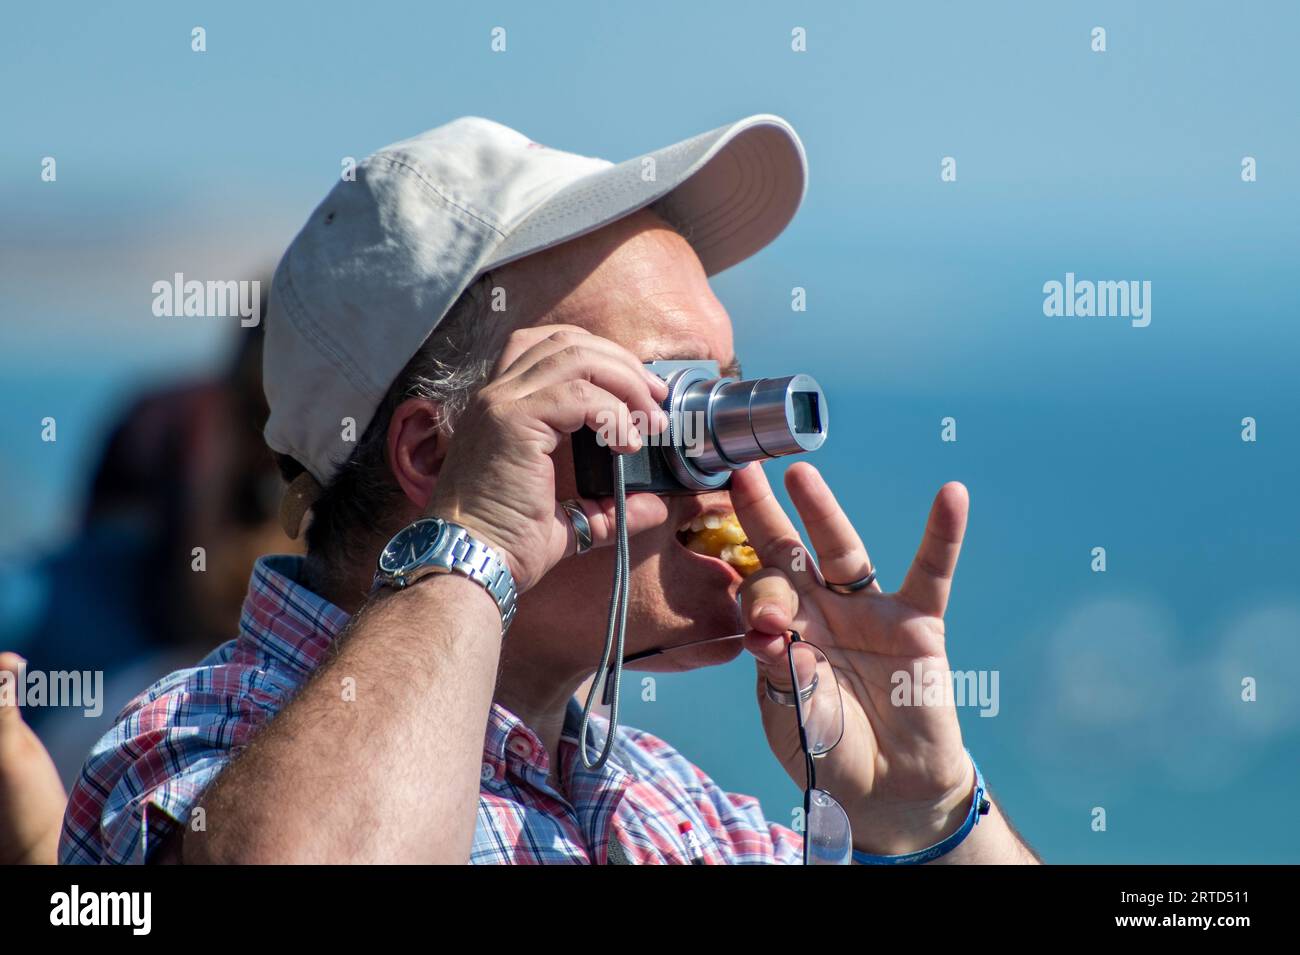 middle aged man wearing a baseball cap using a small digital camera to take a photograph. Stock Photo